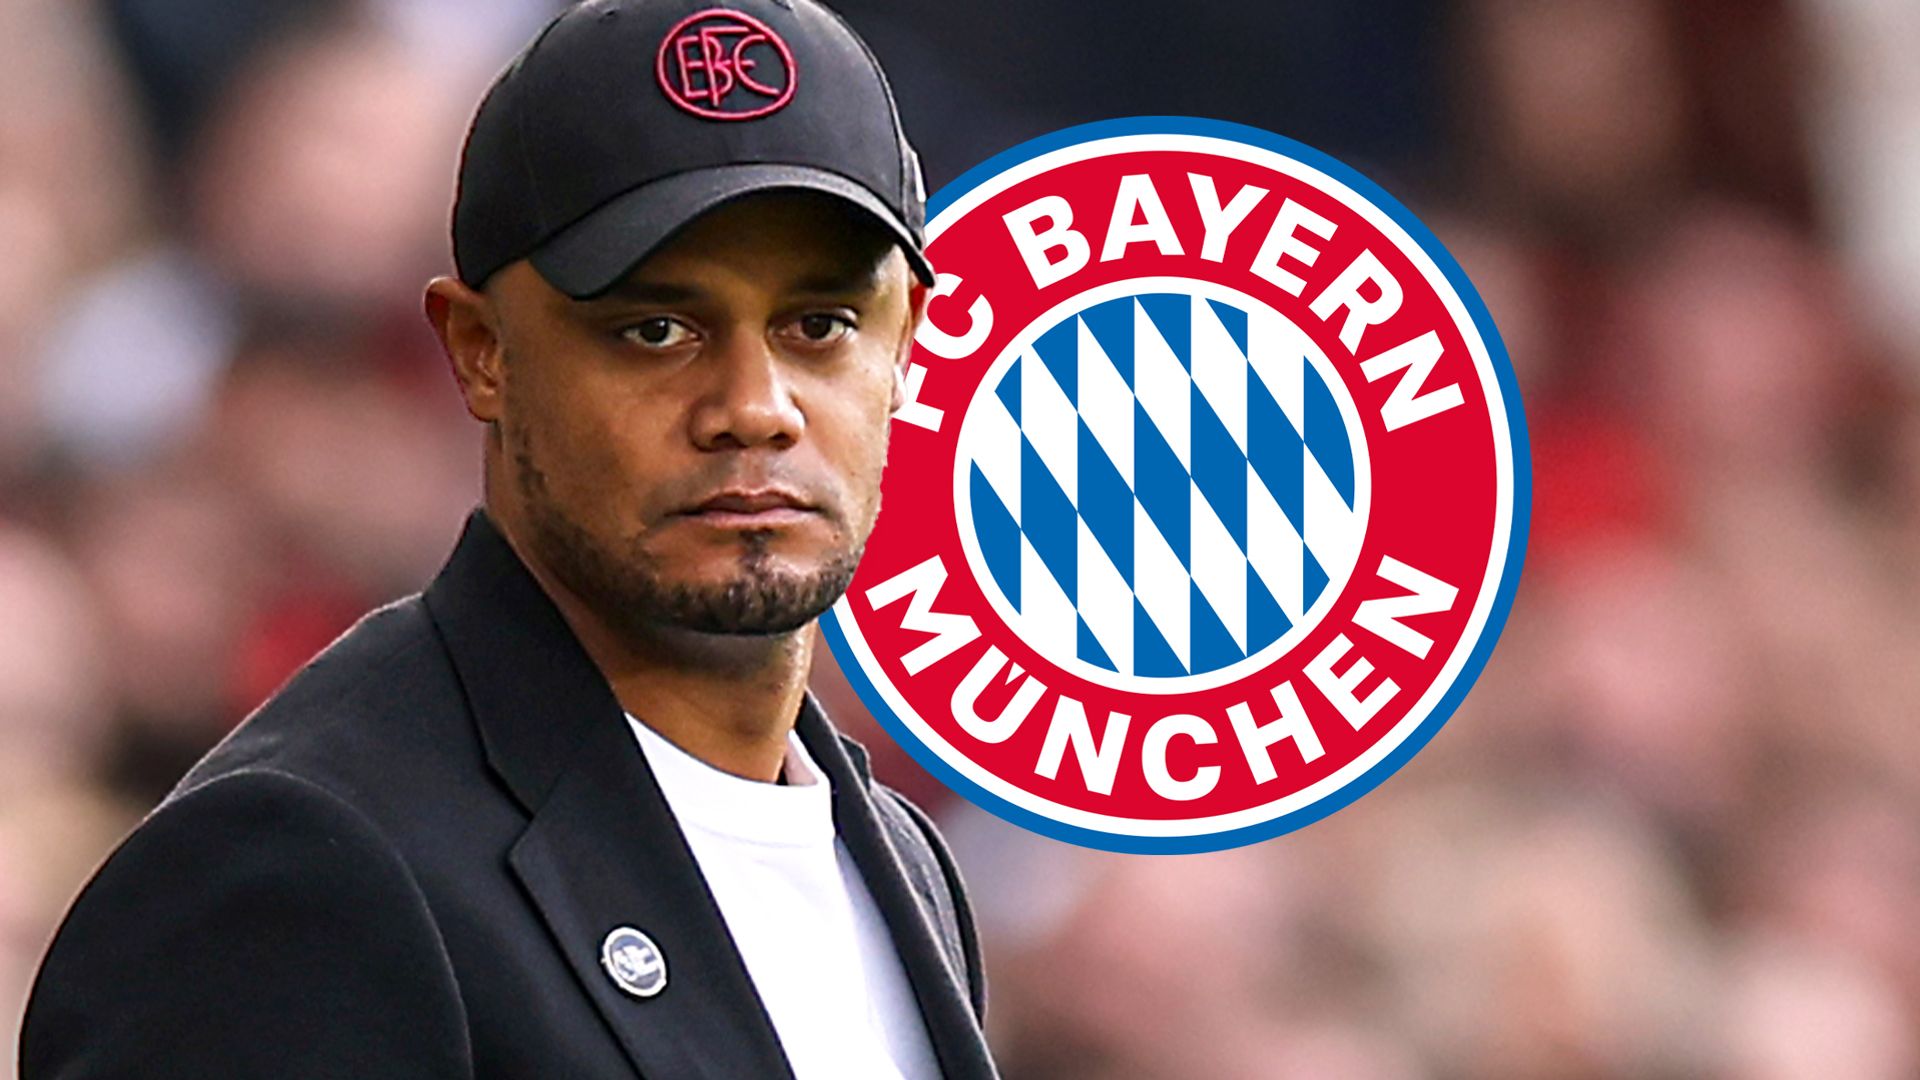 Kompany has 'verbal agreement' to join Bayern but deal not done